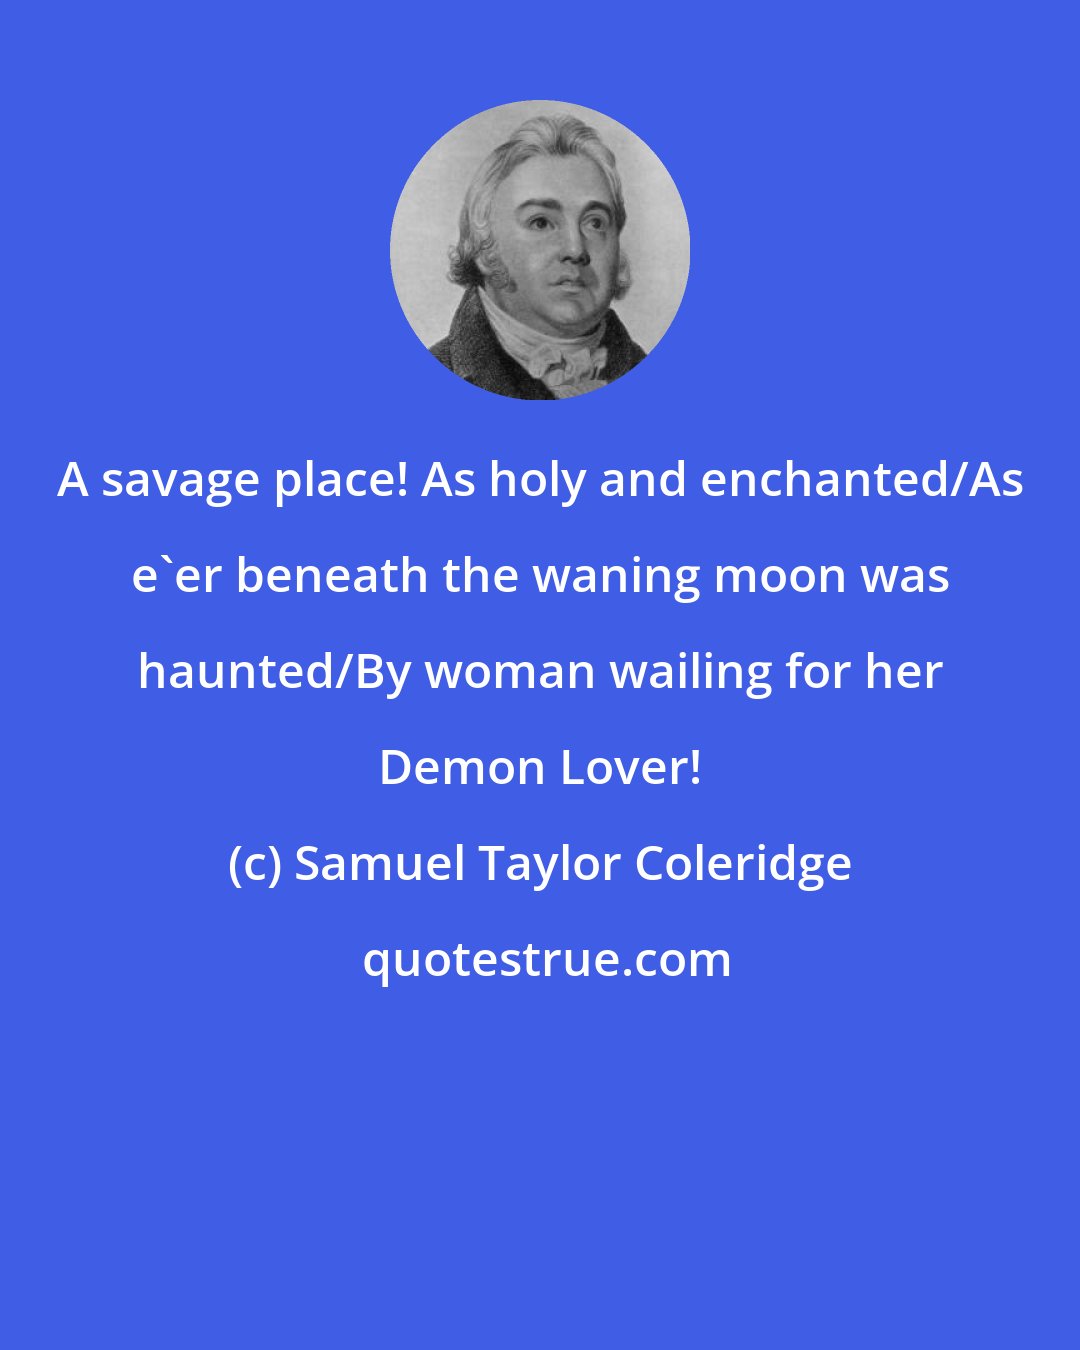 Samuel Taylor Coleridge: A savage place! As holy and enchanted/As e'er beneath the waning moon was haunted/By woman wailing for her Demon Lover!